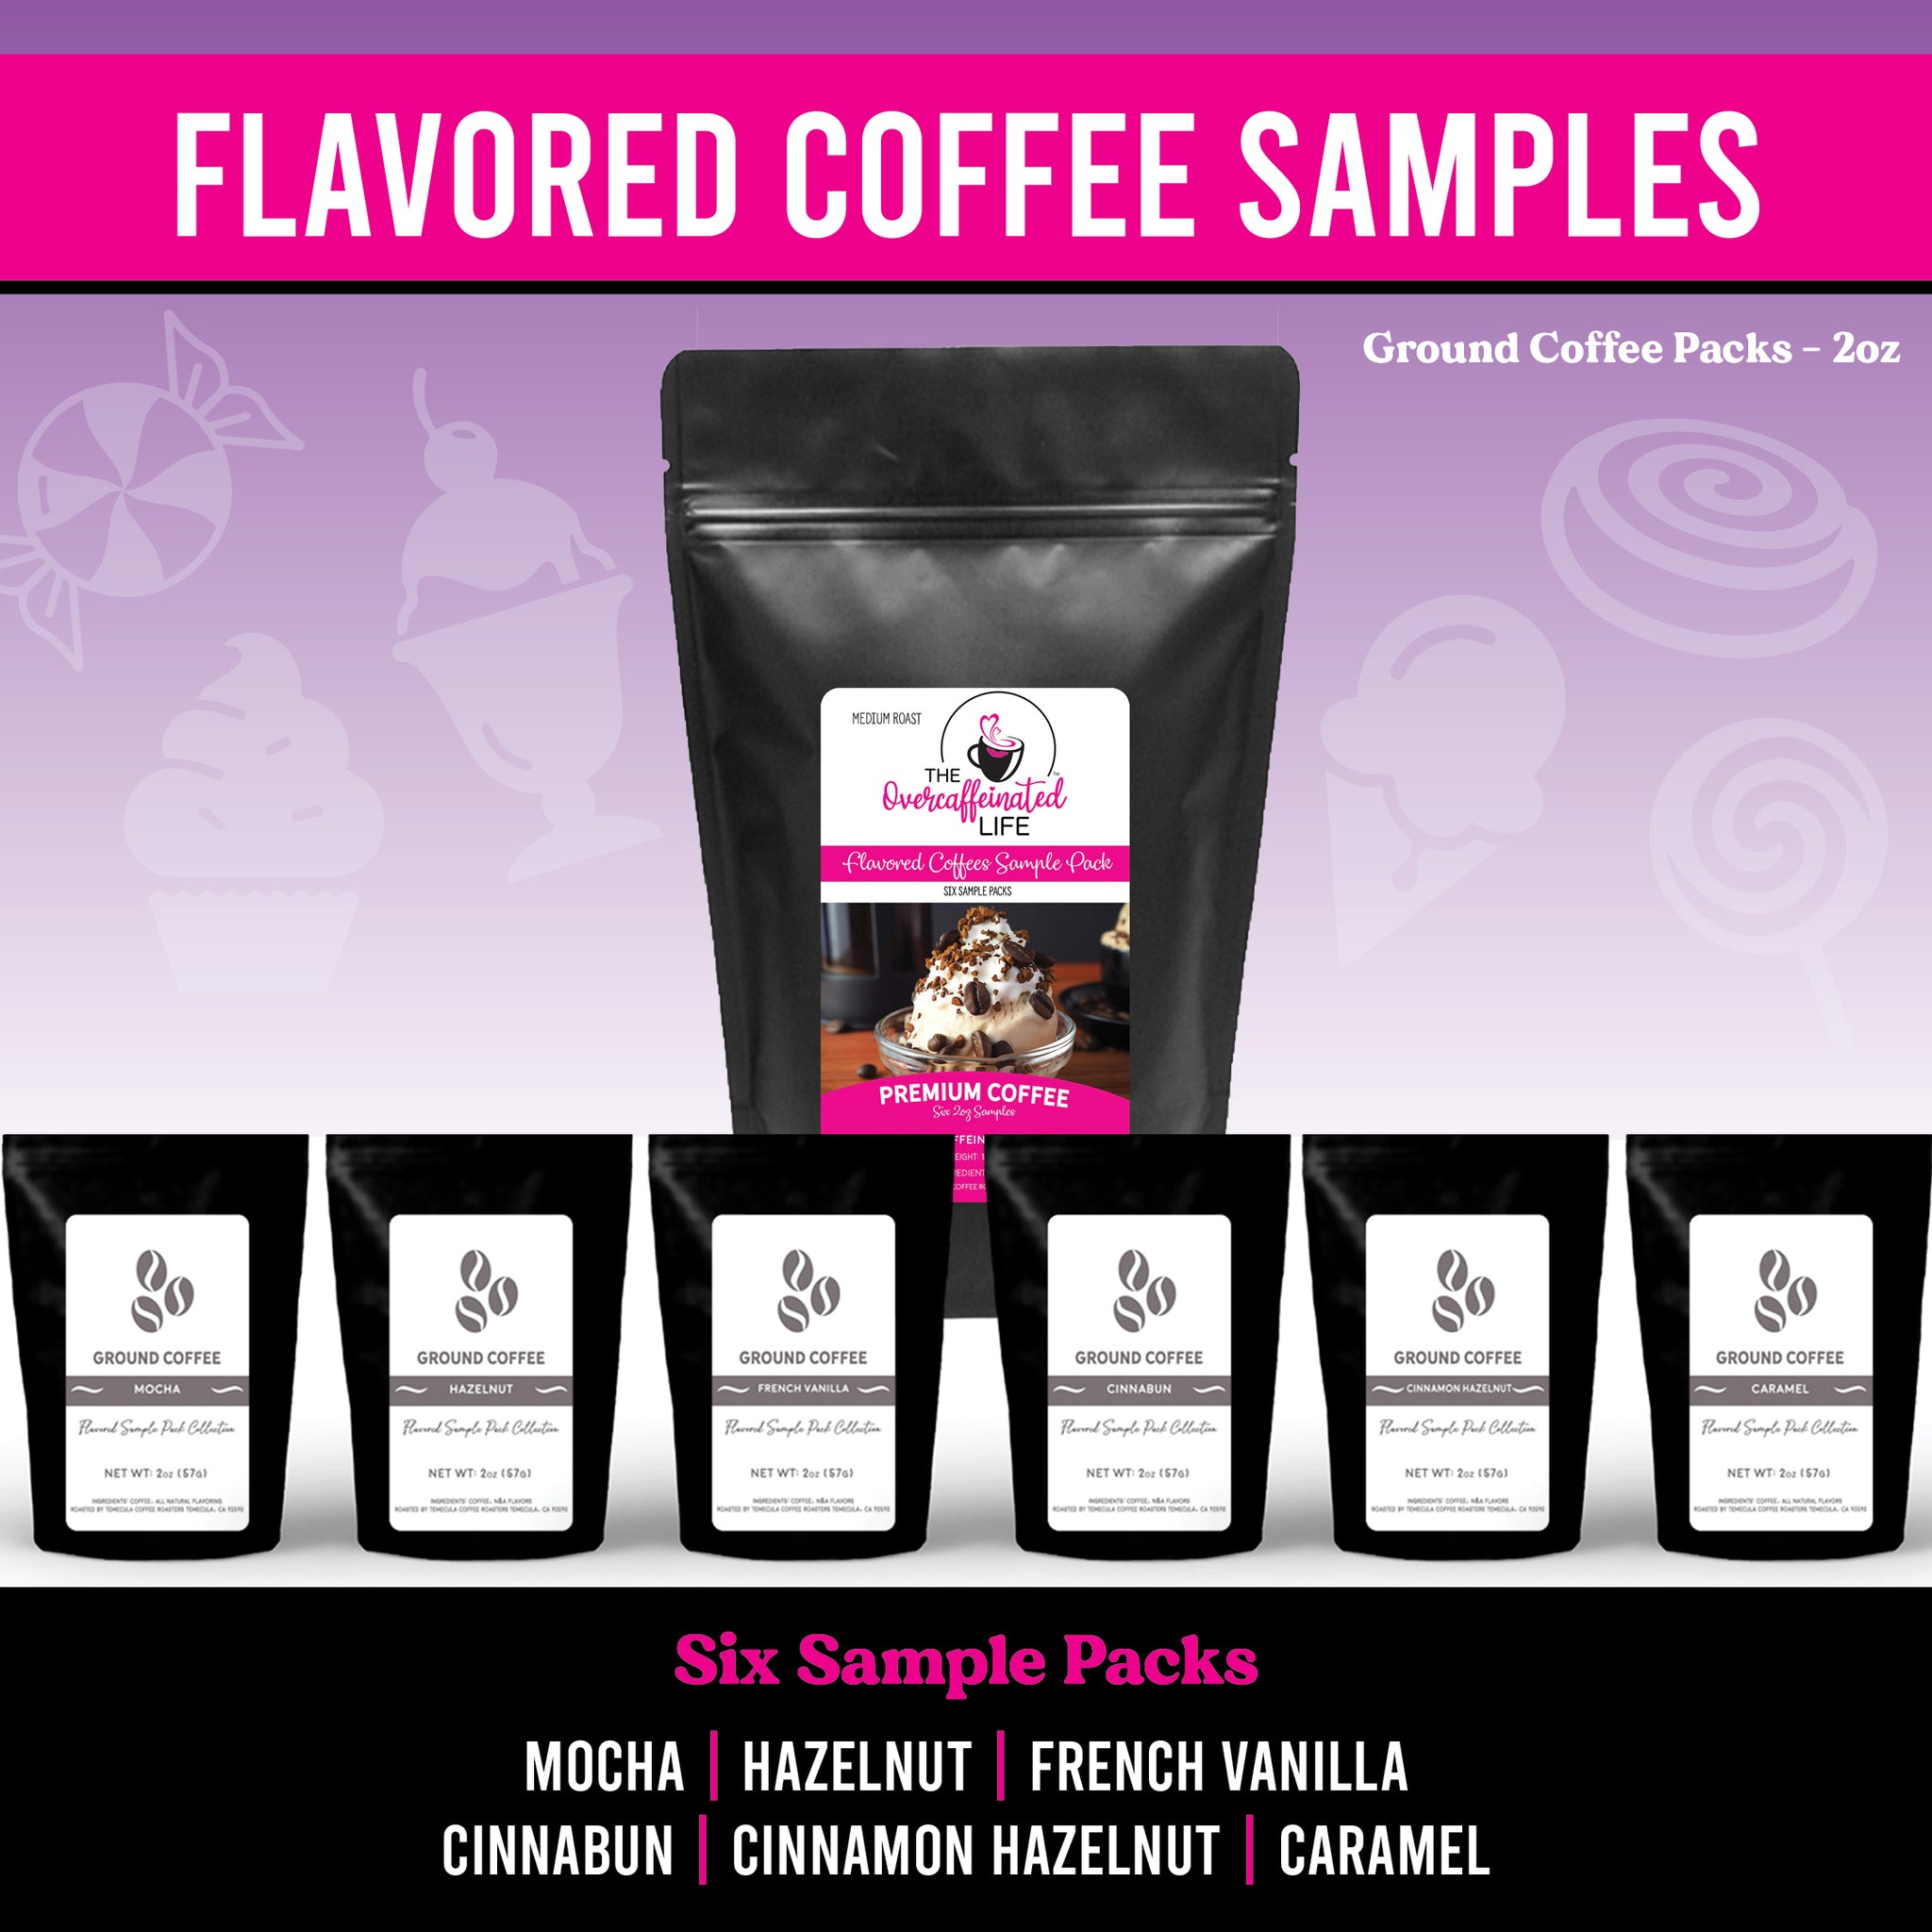 Flavored coffee samples